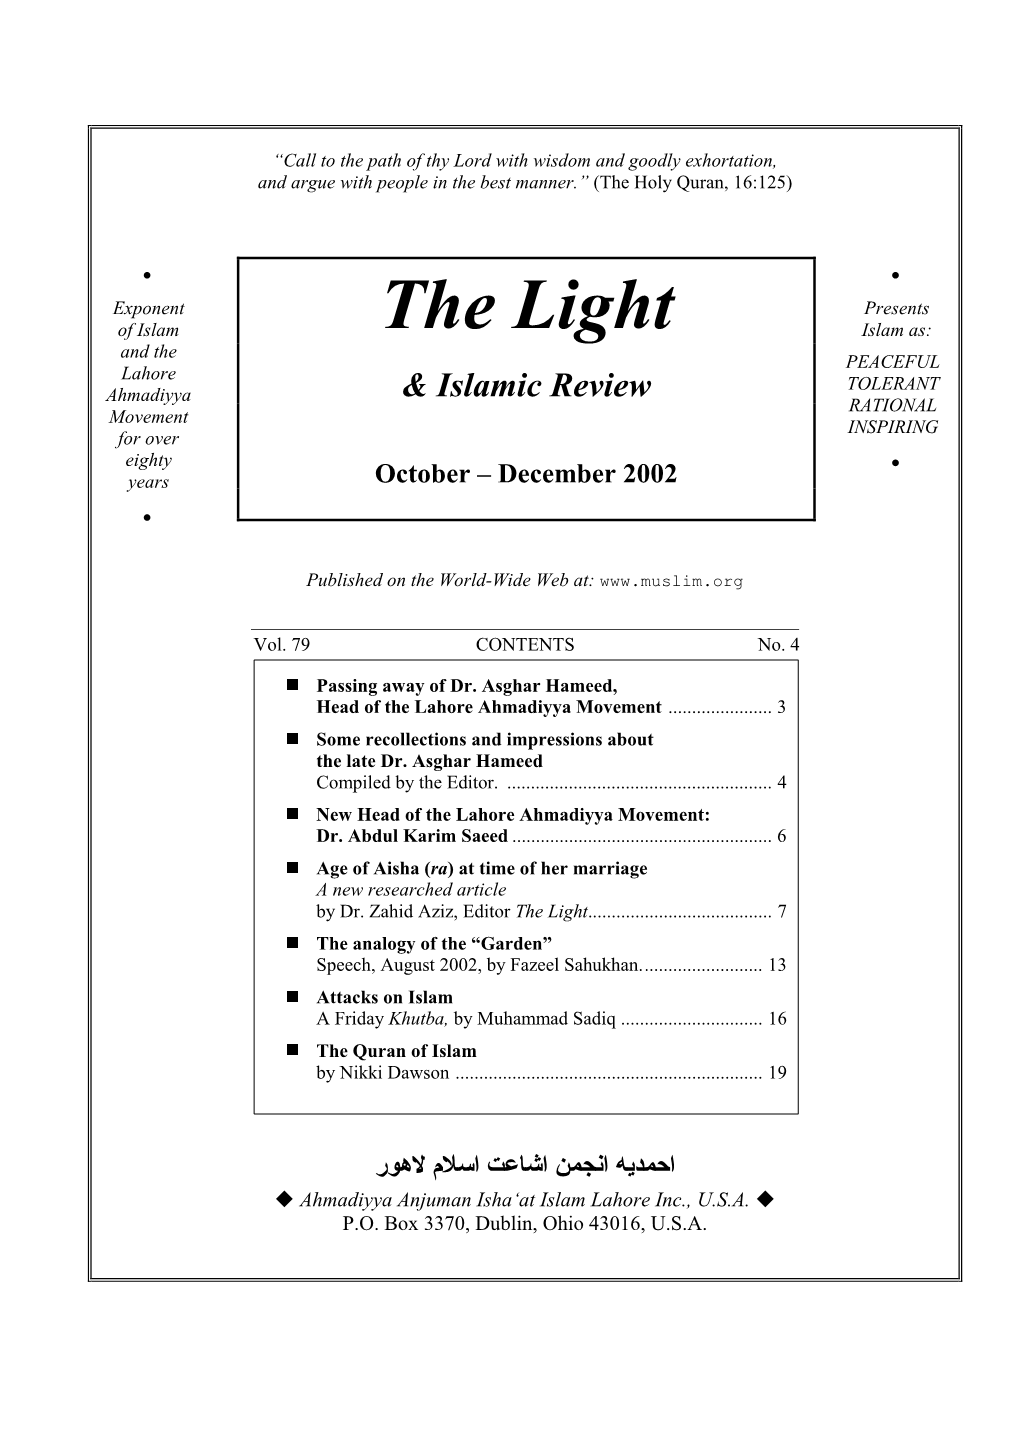 The Light Islam As: and the PEACEFUL Lahore TOLERANT Ahmadiyya & Islamic Review RATIONAL Movement INSPIRING for Over Eighty • Years October – December 2002 •